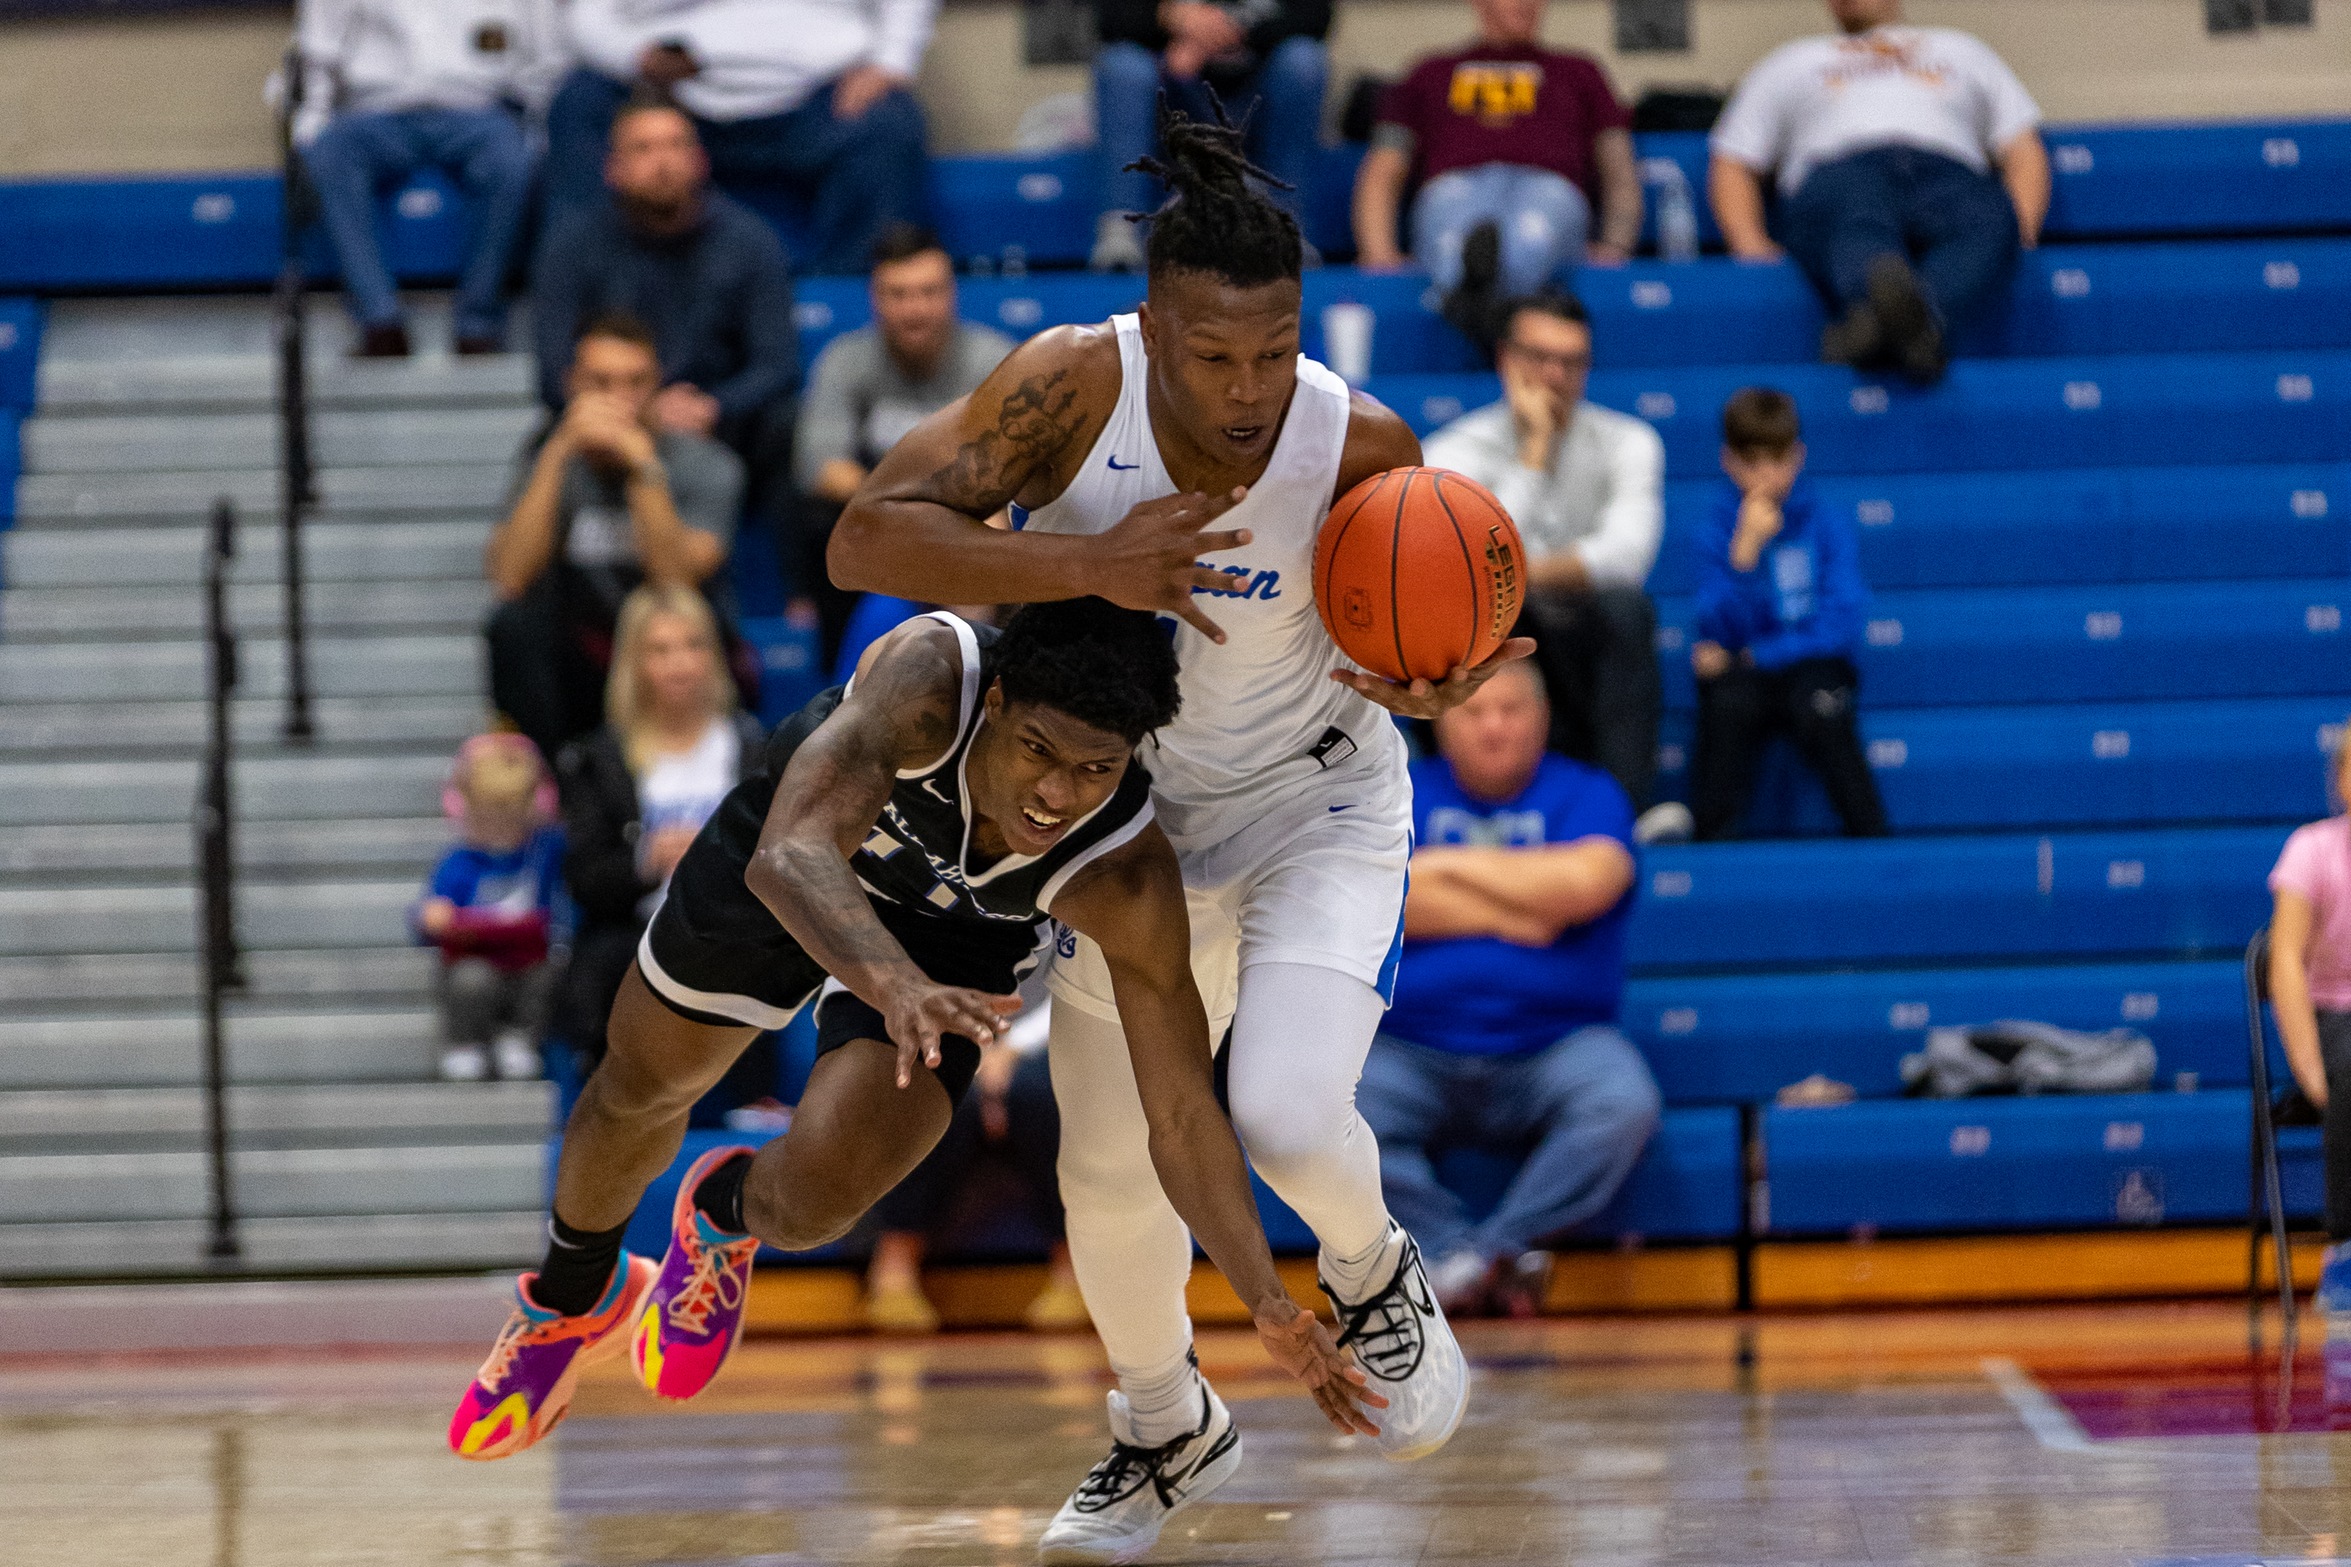 TCC's season comes to an end in NJCAA Semifinals